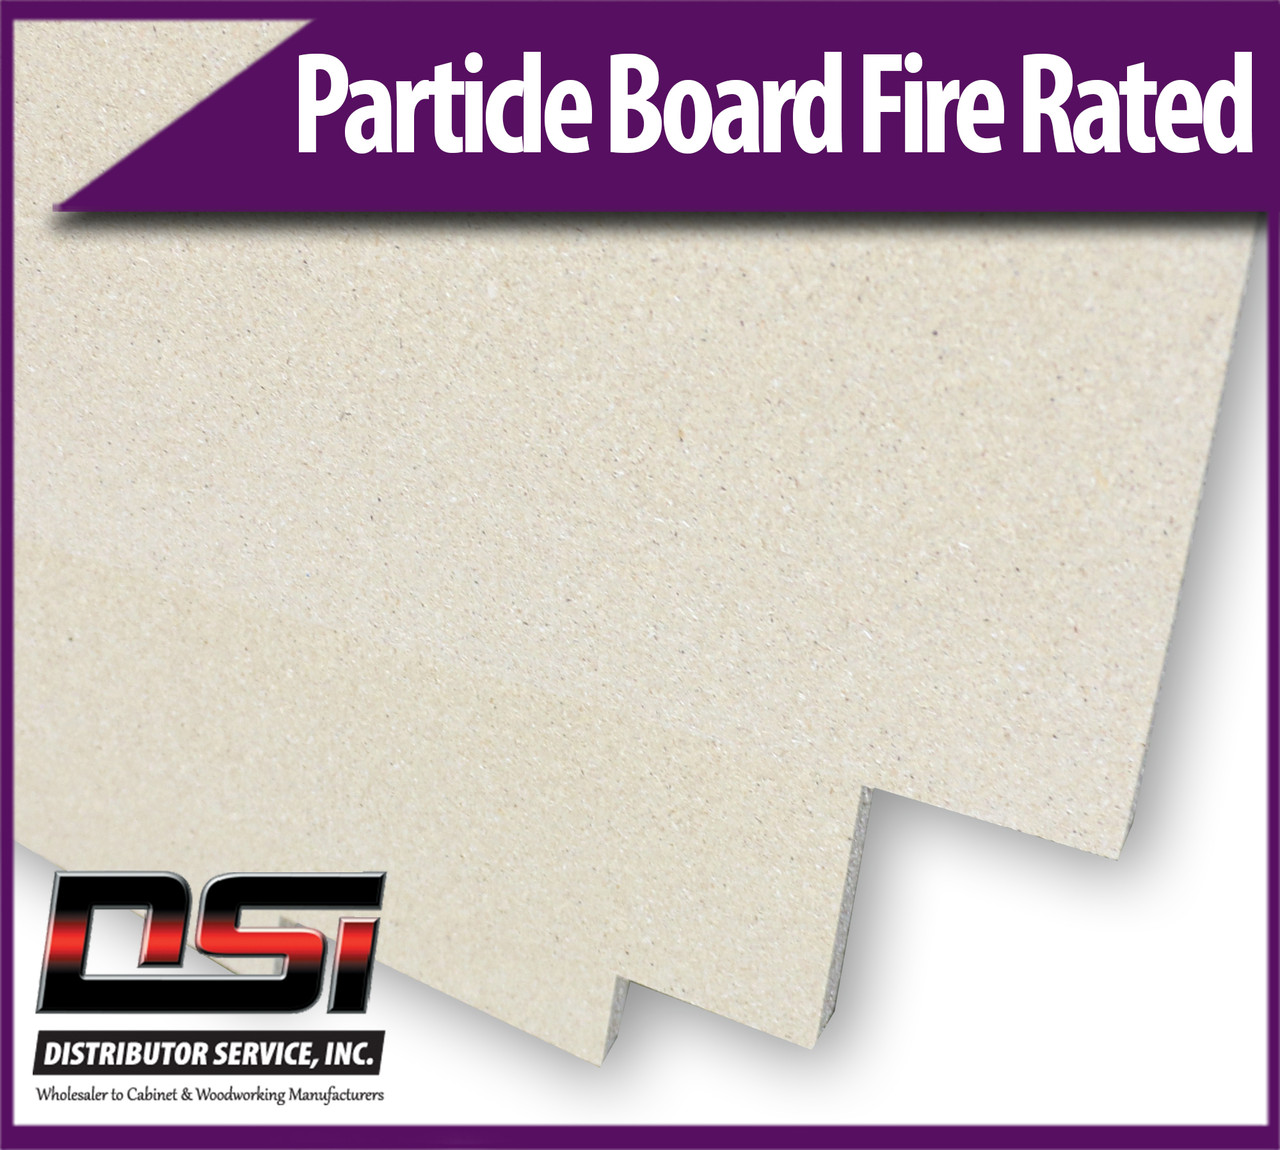 Particle Board Core Fire Rated 1/2" x 49" x 97" Industrial Particleboard Panels